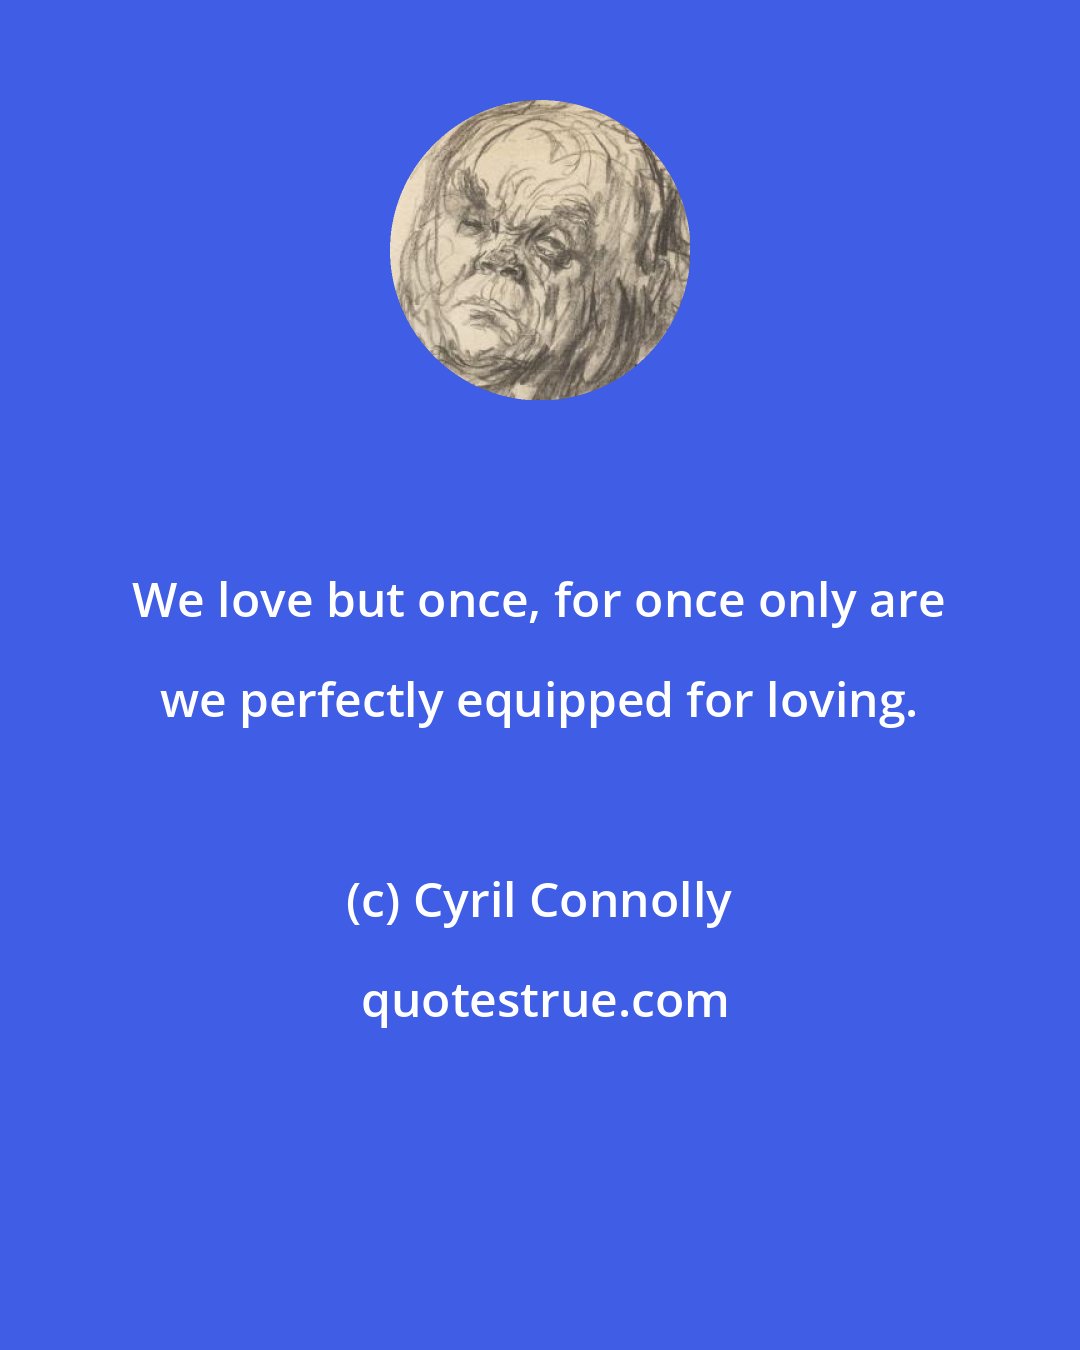 Cyril Connolly: We love but once, for once only are we perfectly equipped for loving.